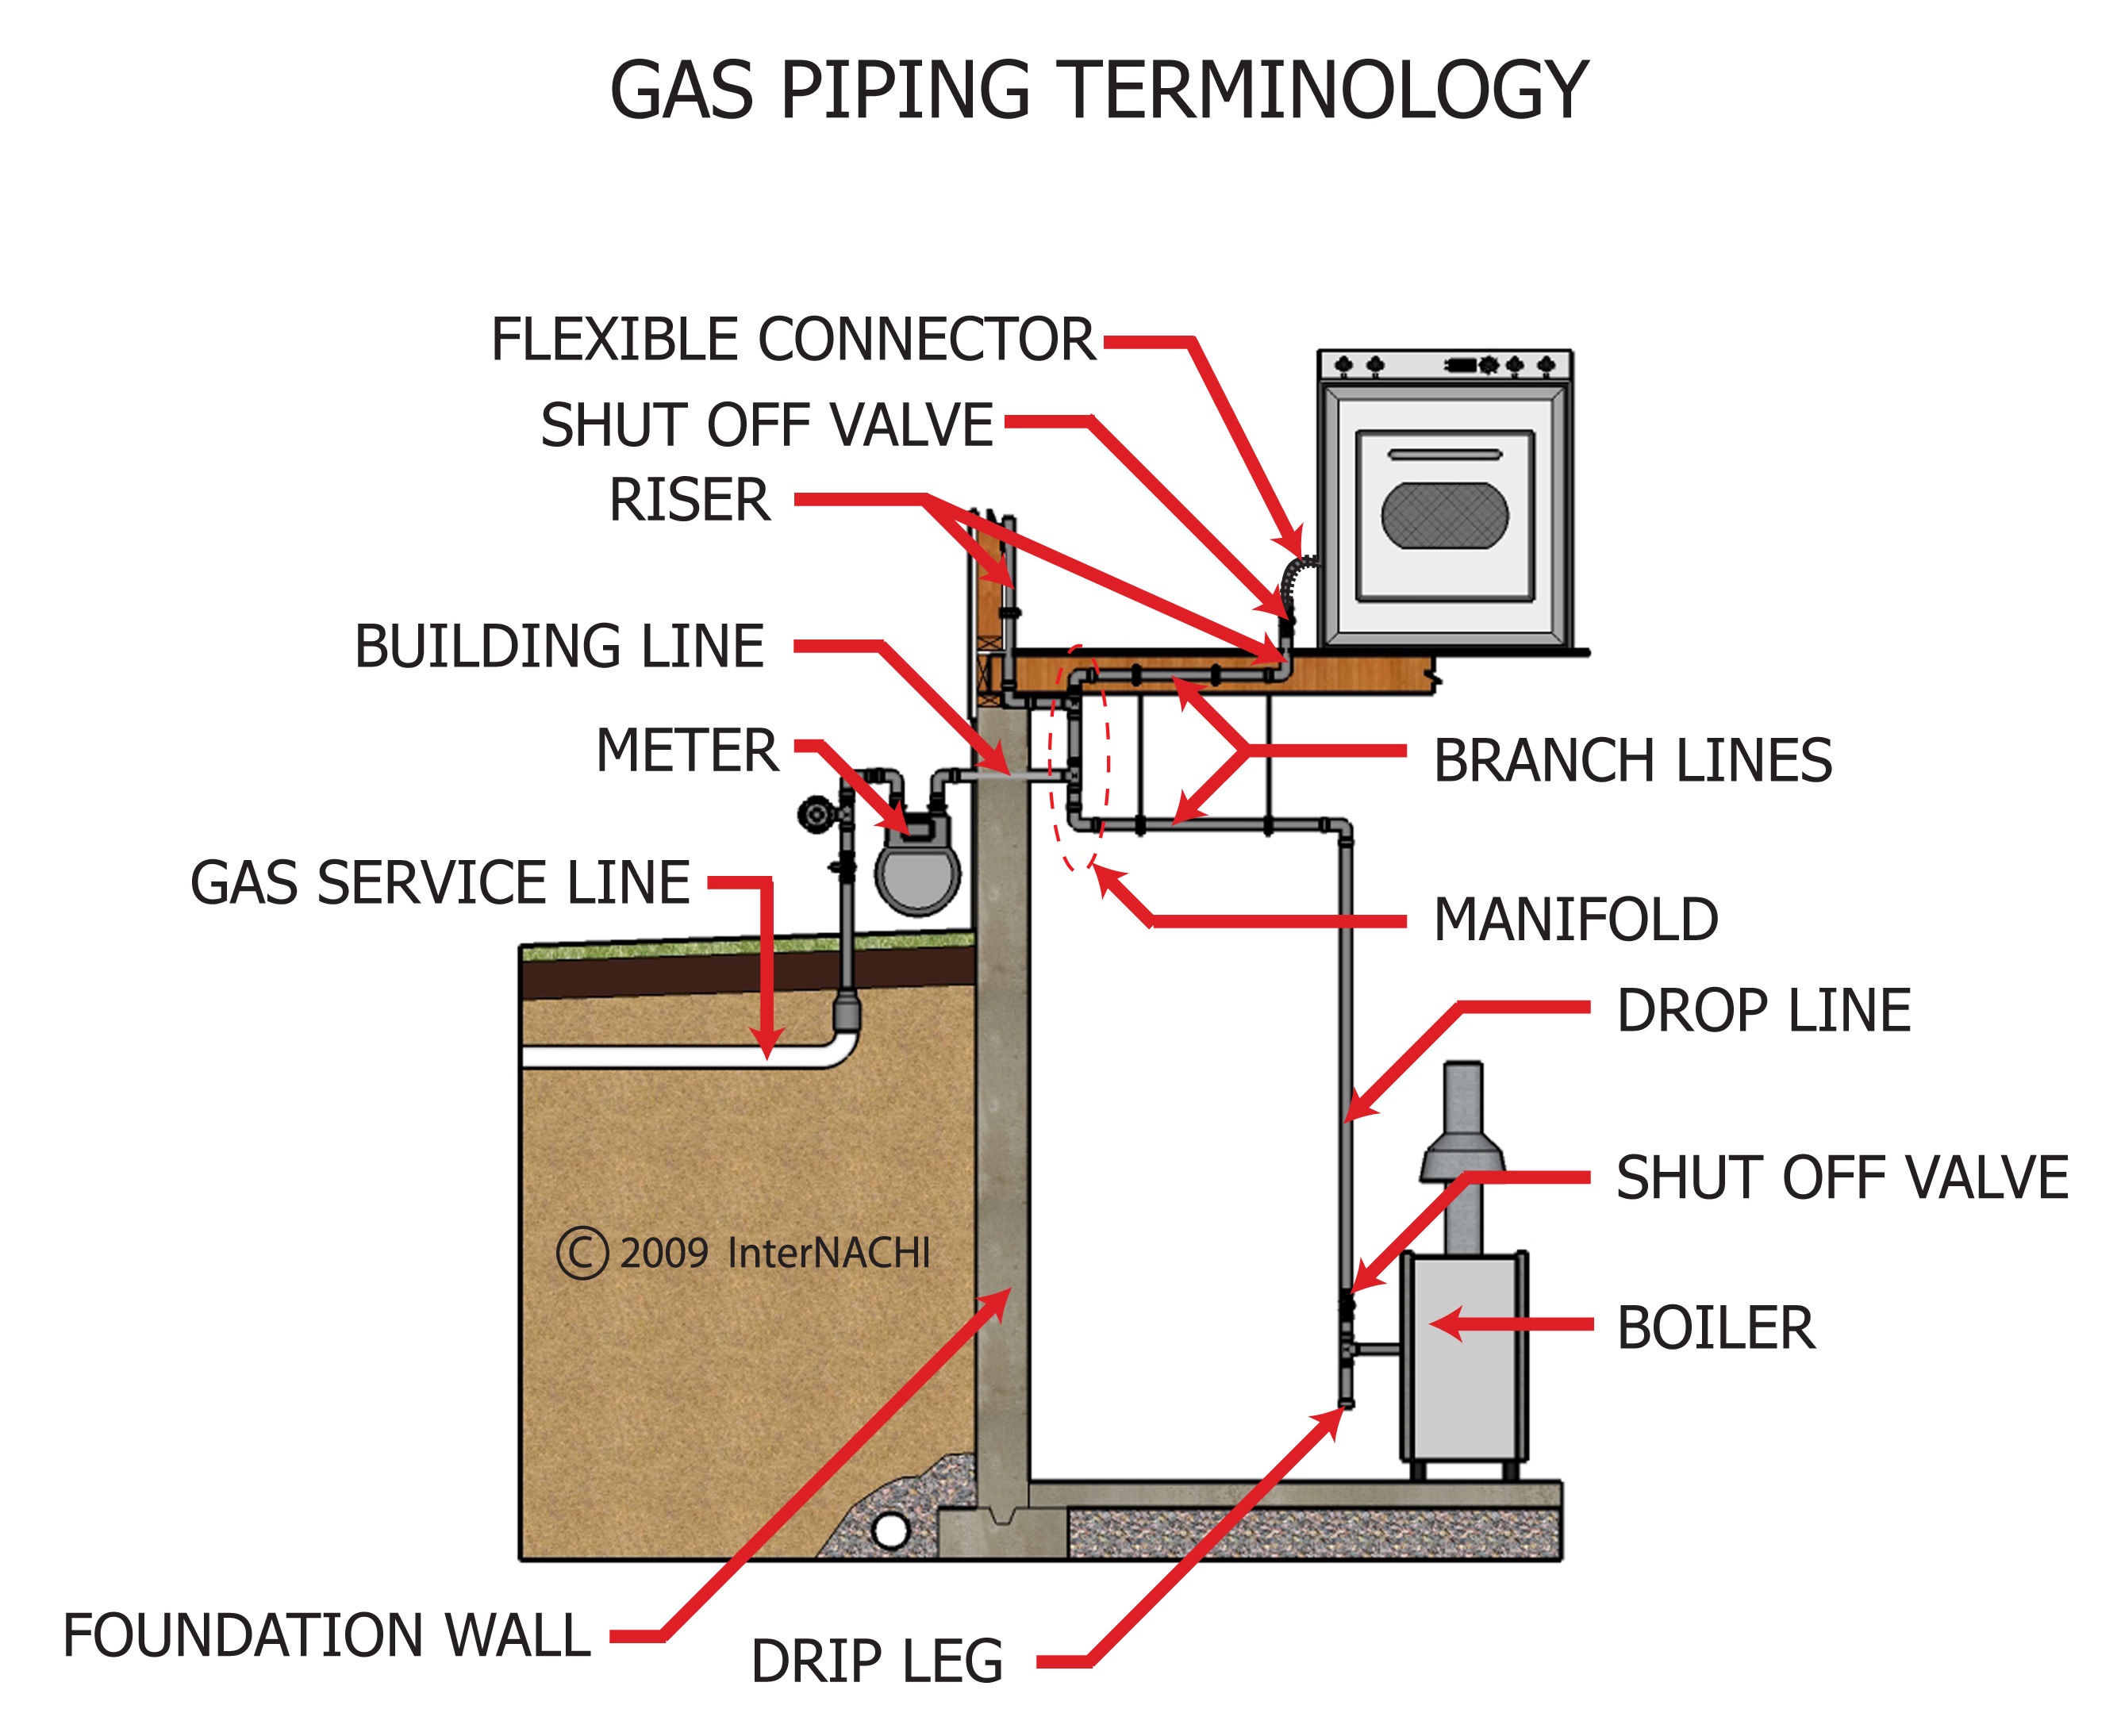 Gas piping terminology.